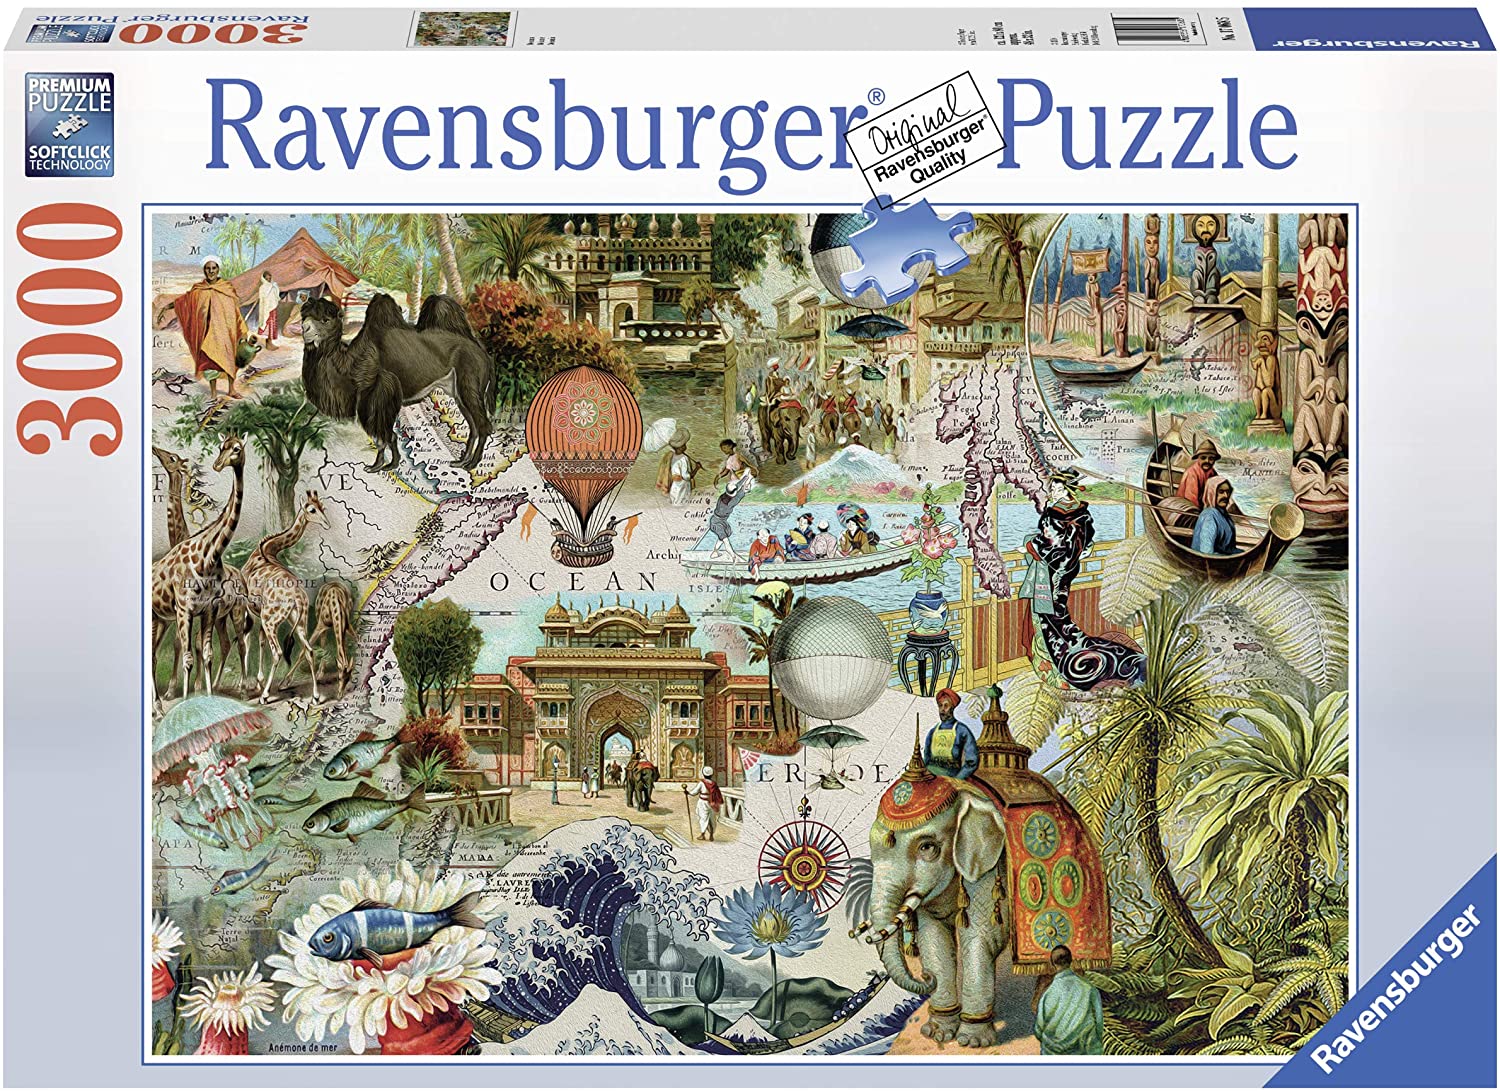 Ravensburger Oceania 3000 Piece Puzzle – The Puzzle Collections